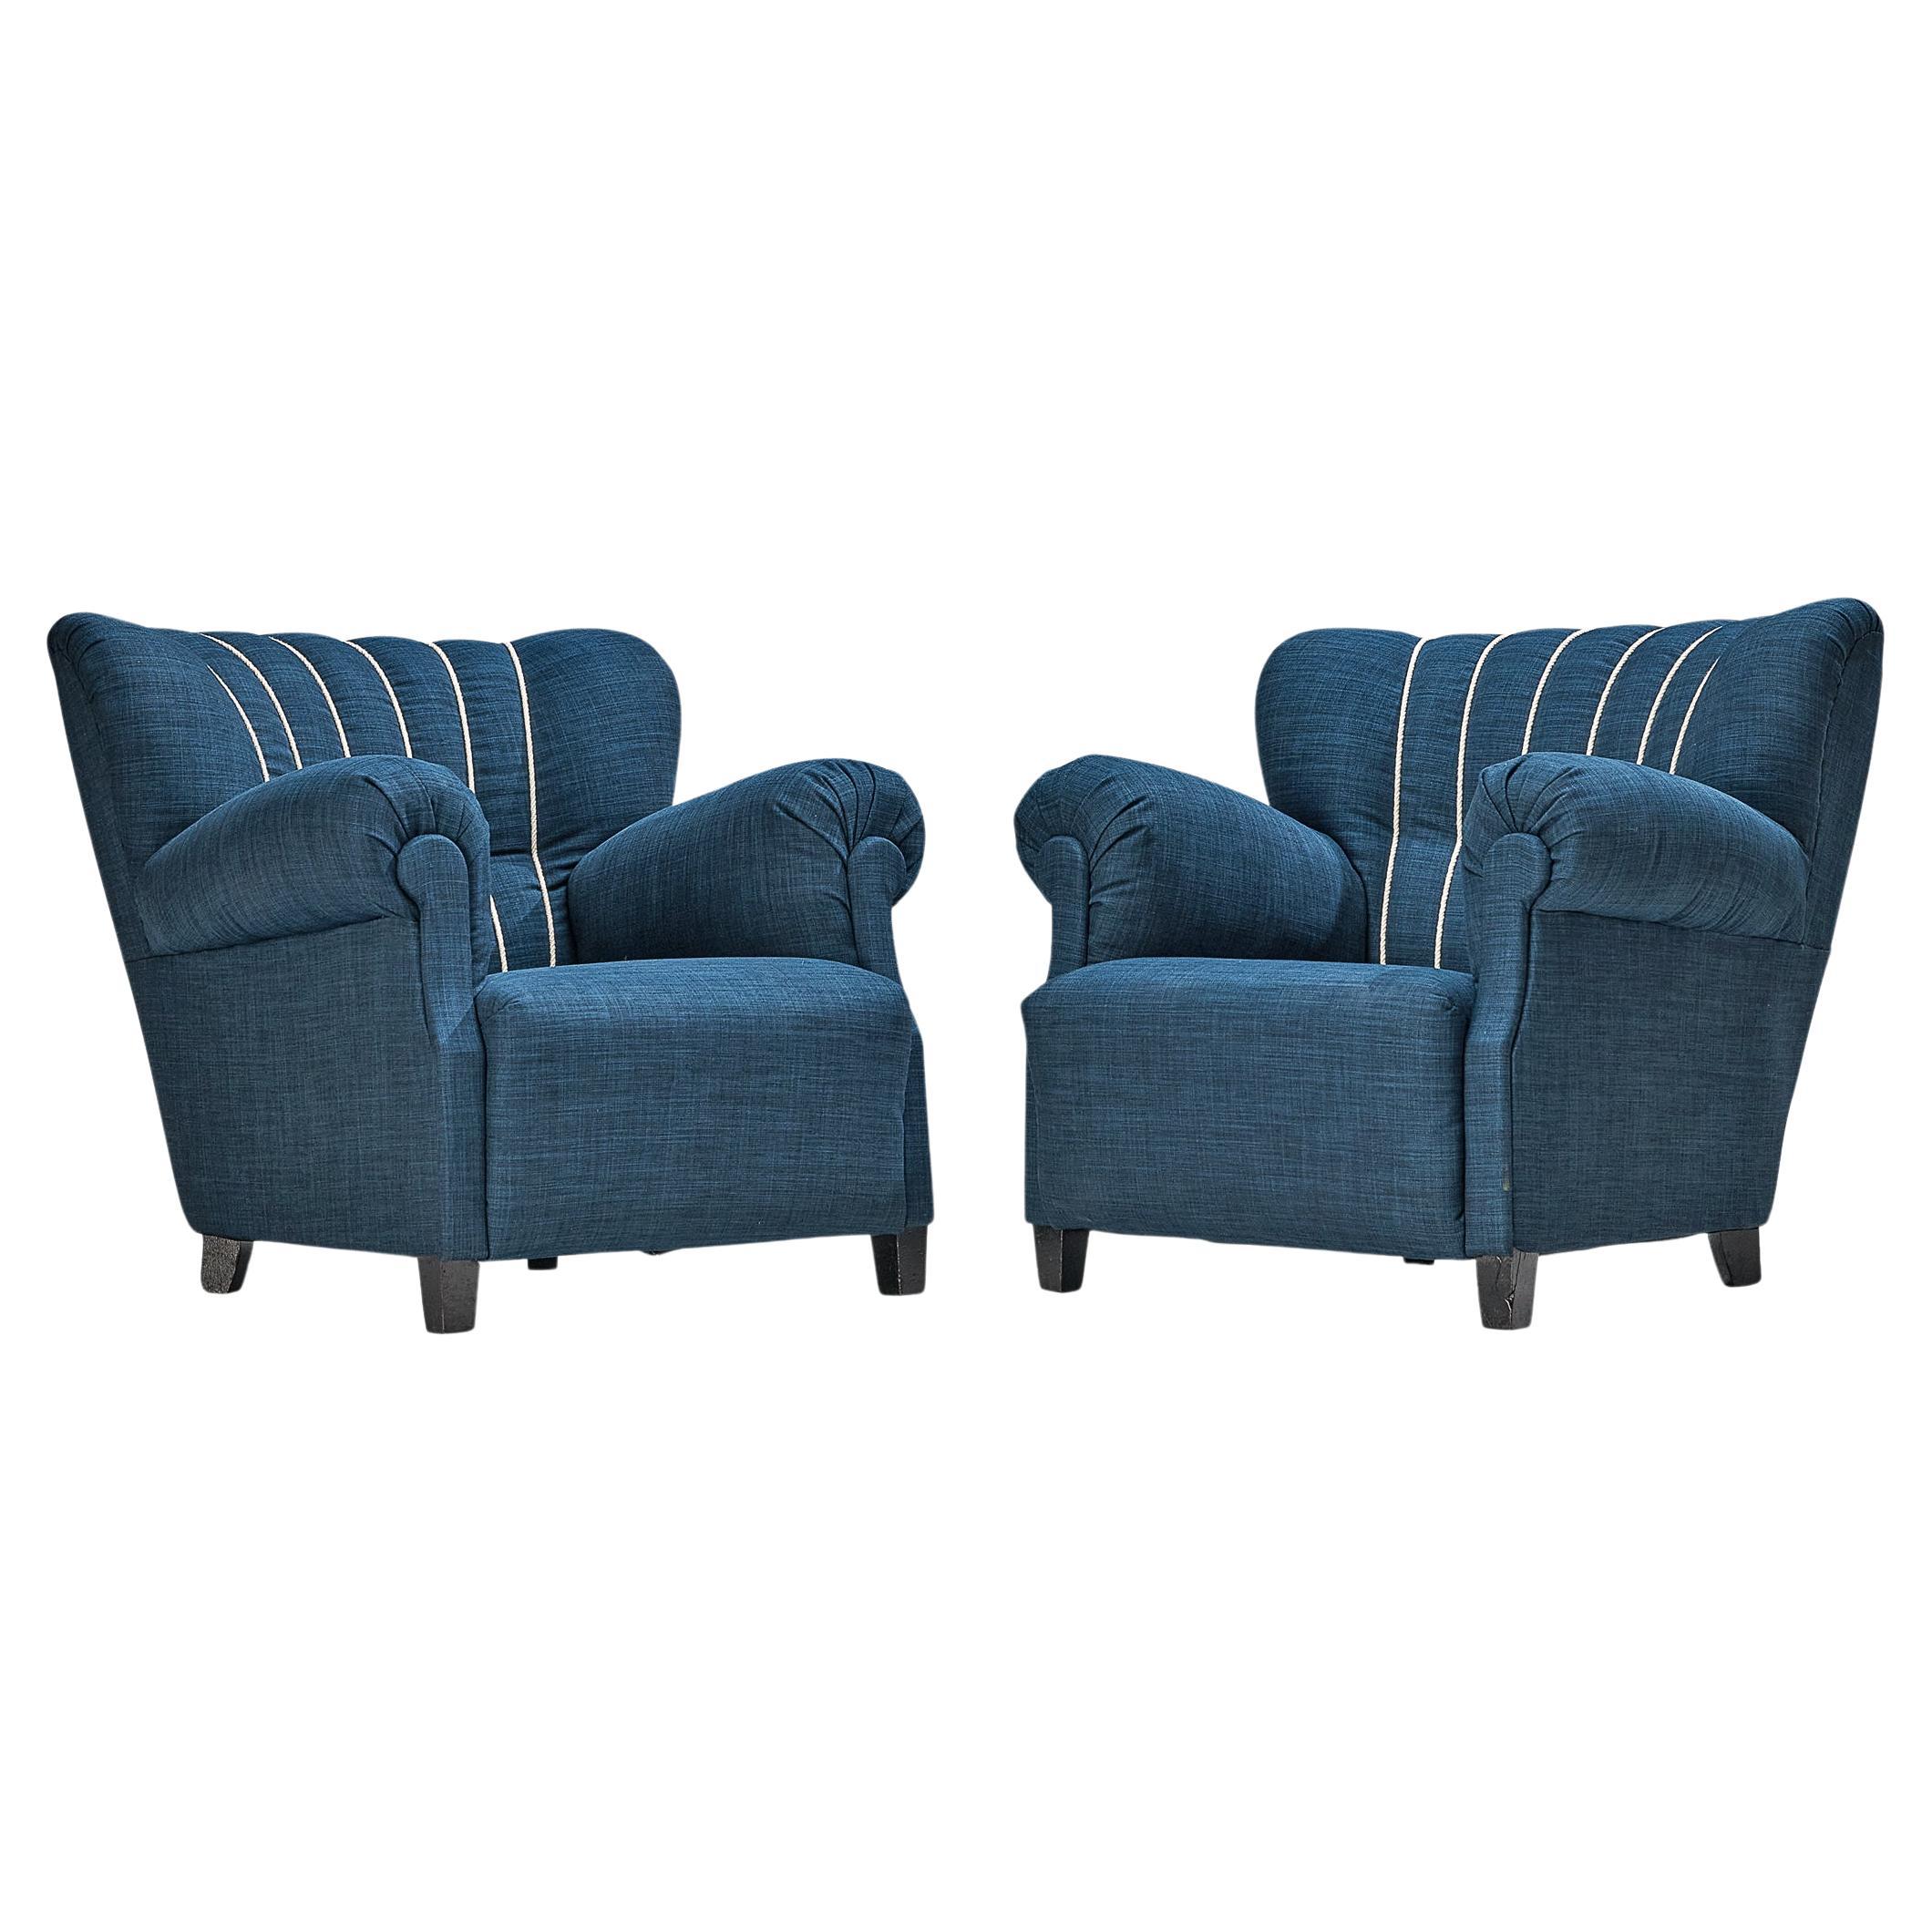 Pair of Art Deco Lounge Chairs in Blue Upholstery For Sale